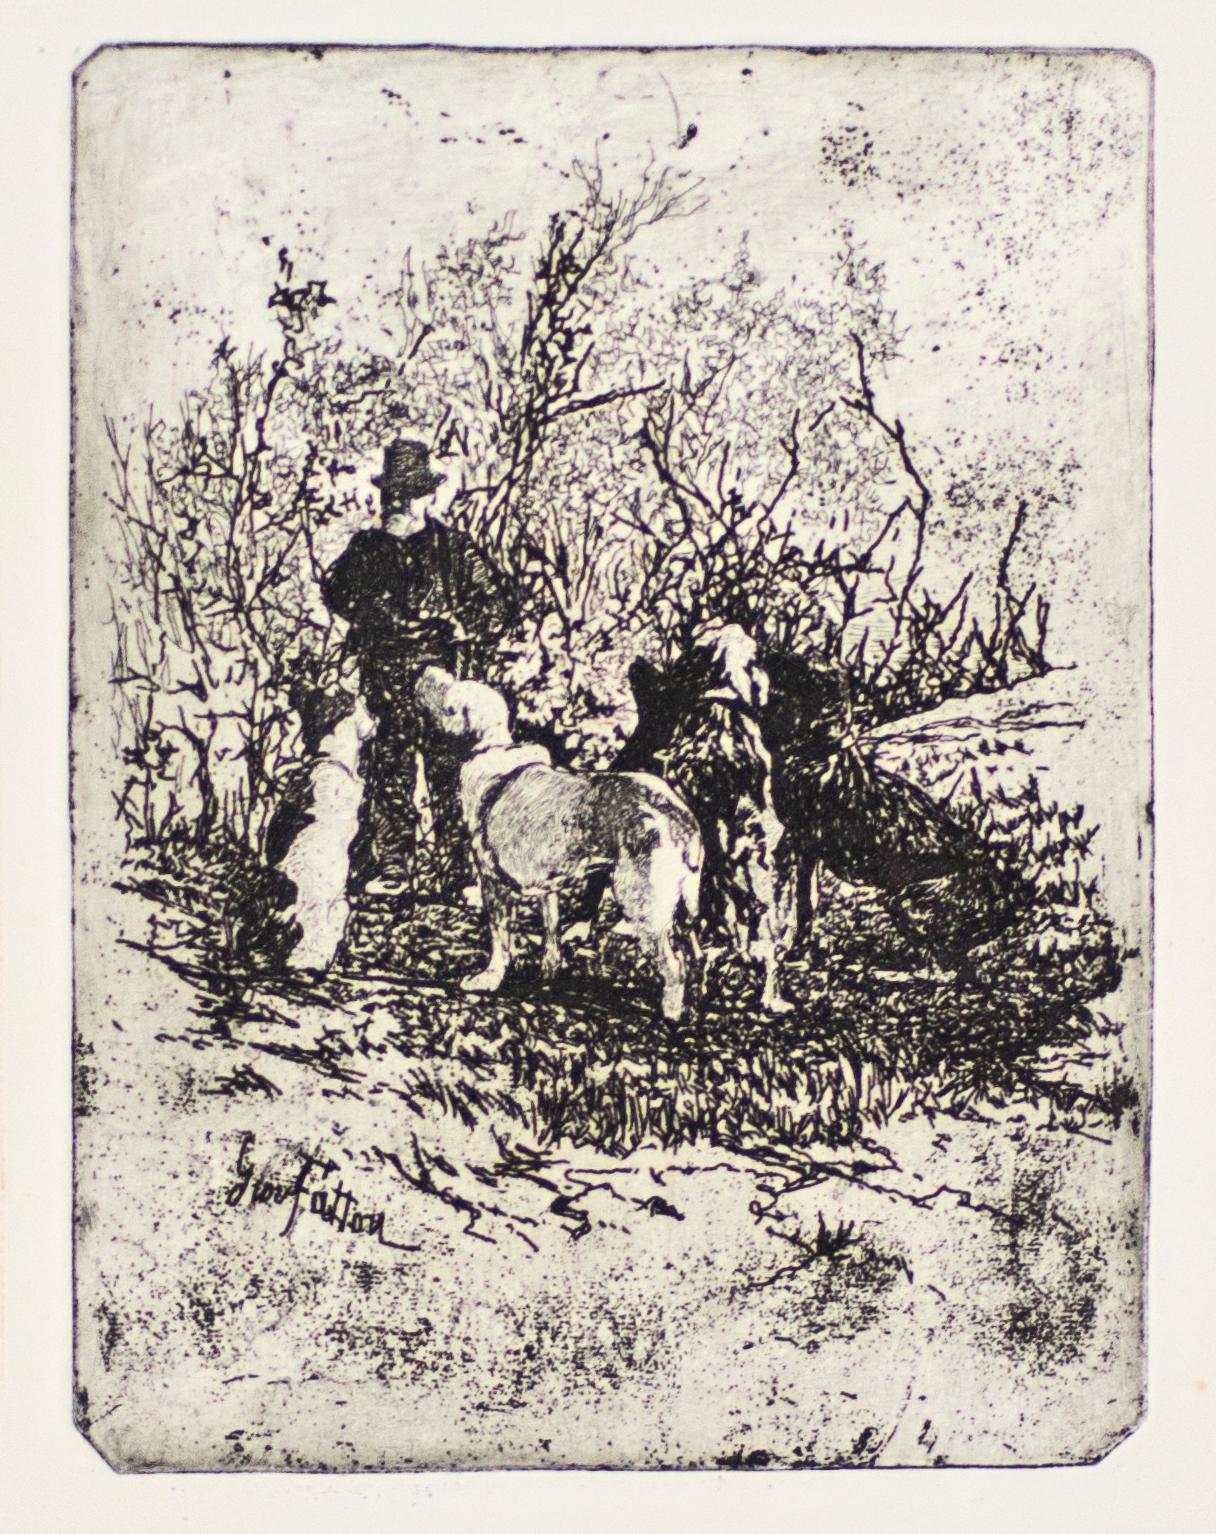 The plate is previous Diego Martelli's death. Diego Martelli was a close friend on many of the impressionists as well as of the italian Macchiaioli painters, among whom Edgar Degas. 
The dry point technique reminds of other landscape of the author.